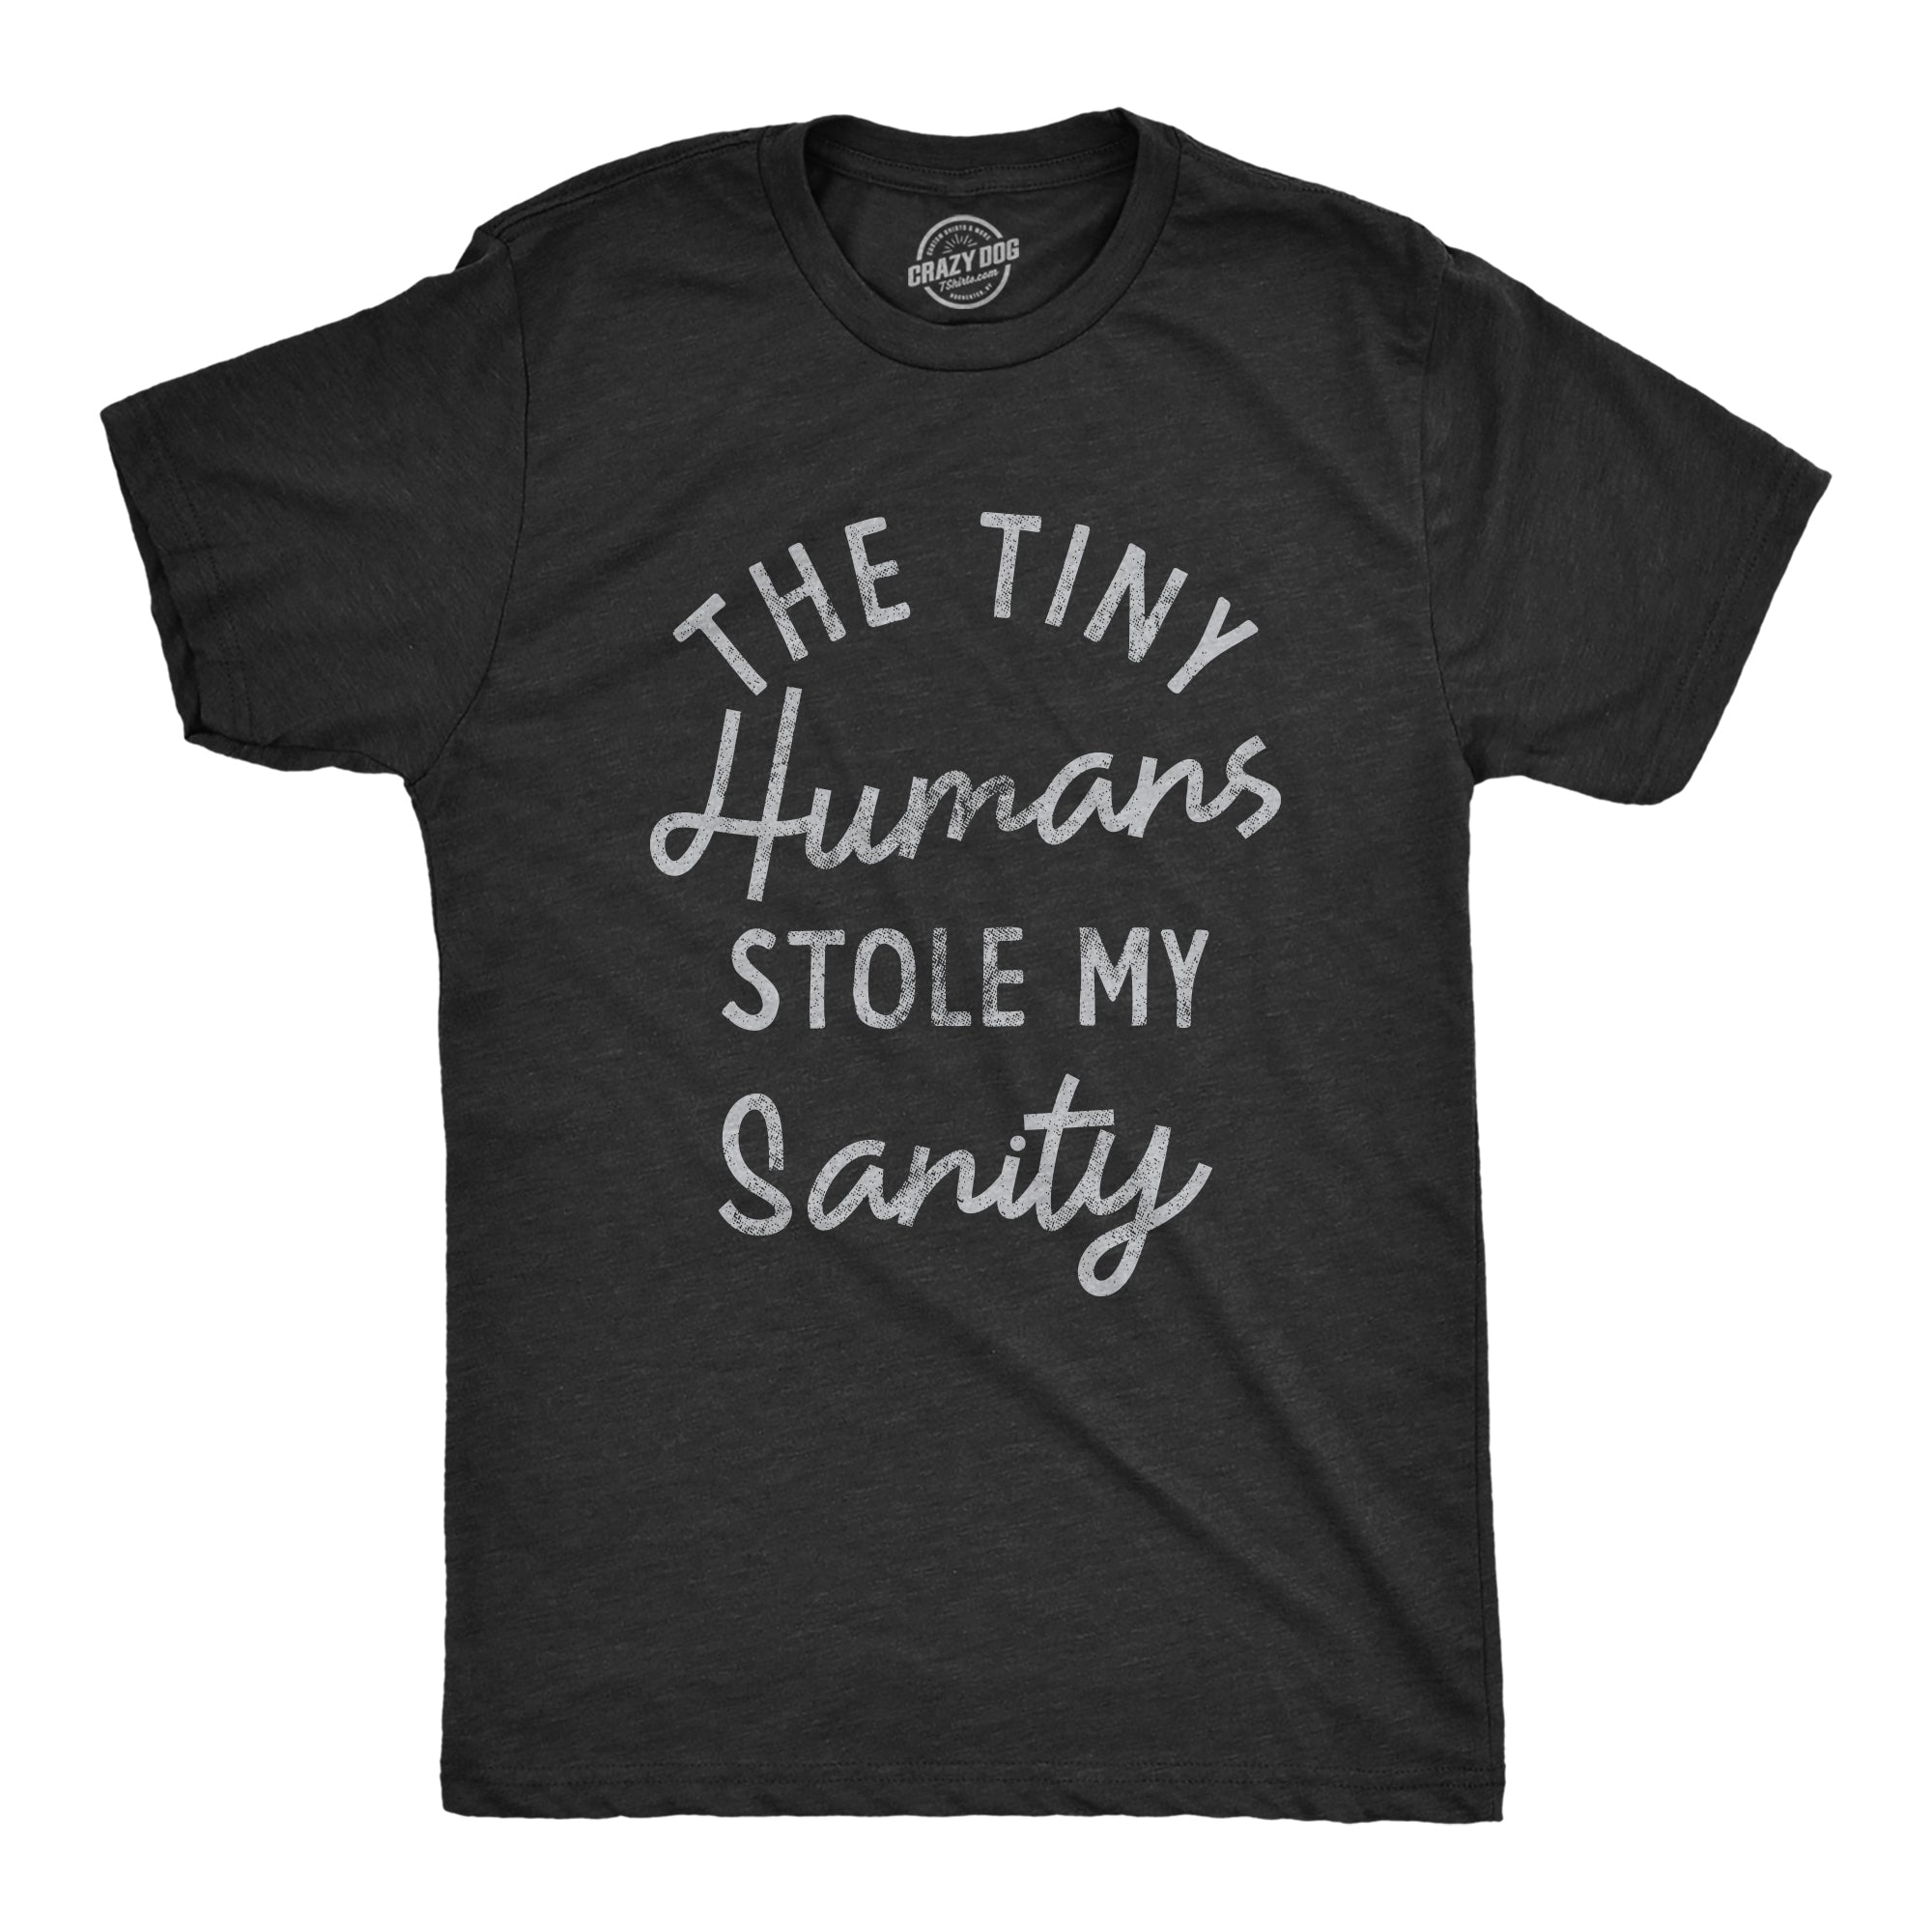 Funny Heather Black The Tiny Humans Stole My Sanity Mens T Shirt Nerdy Daughter son Tee